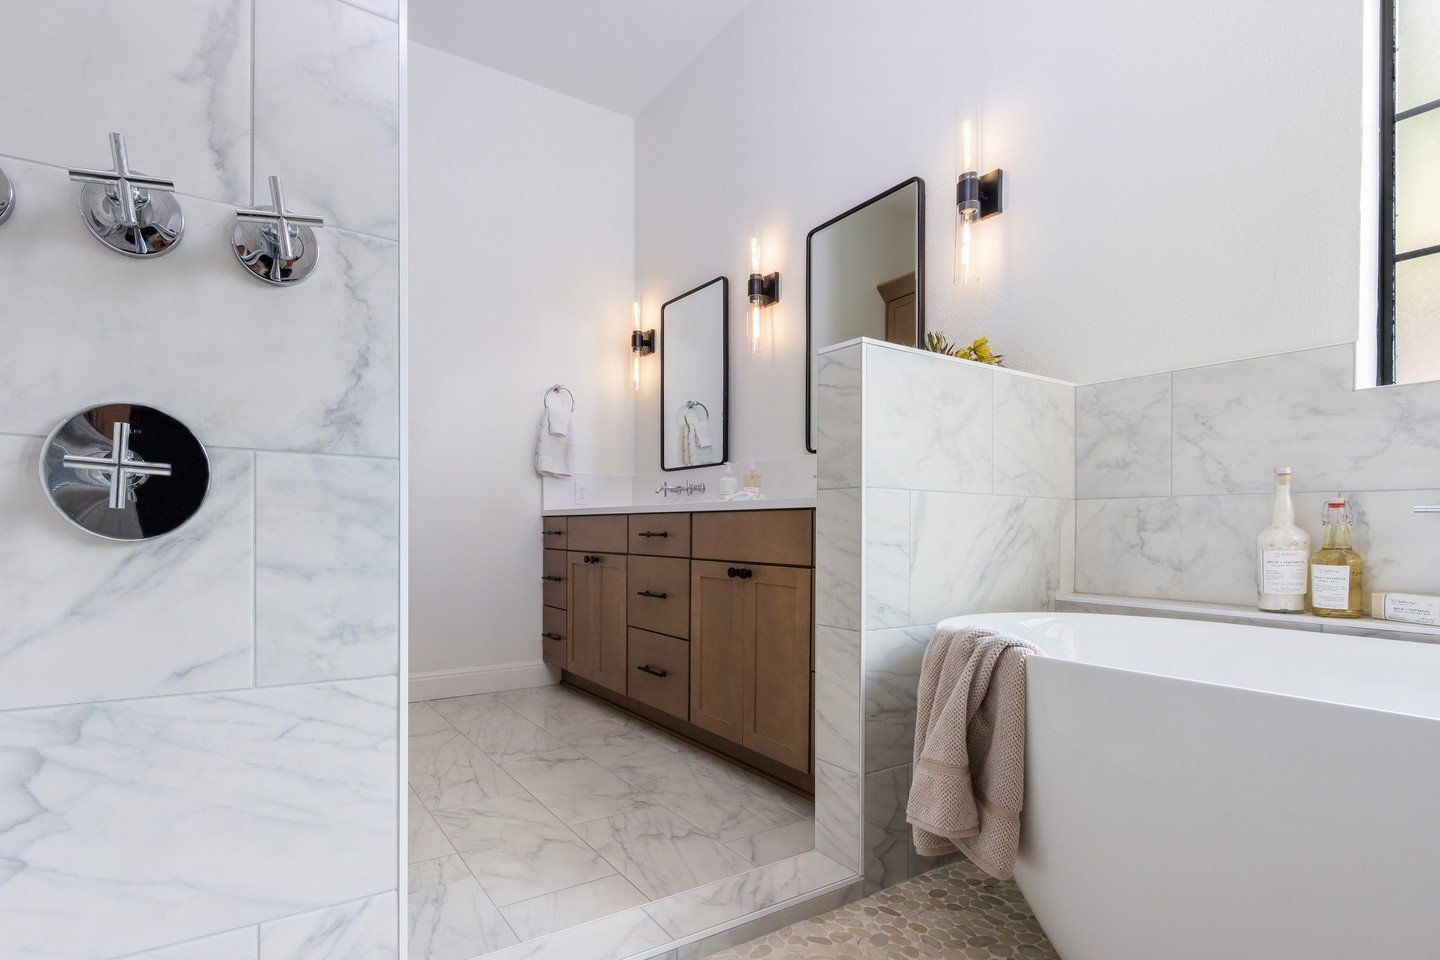 Relaxation is calling your name! Step into this serene sanctuary where every detail whispers calm. From the elegant marble tiles that grace the walls and floor to the minimalist touches around the soaking tub, this bathroom is designed to wash away t